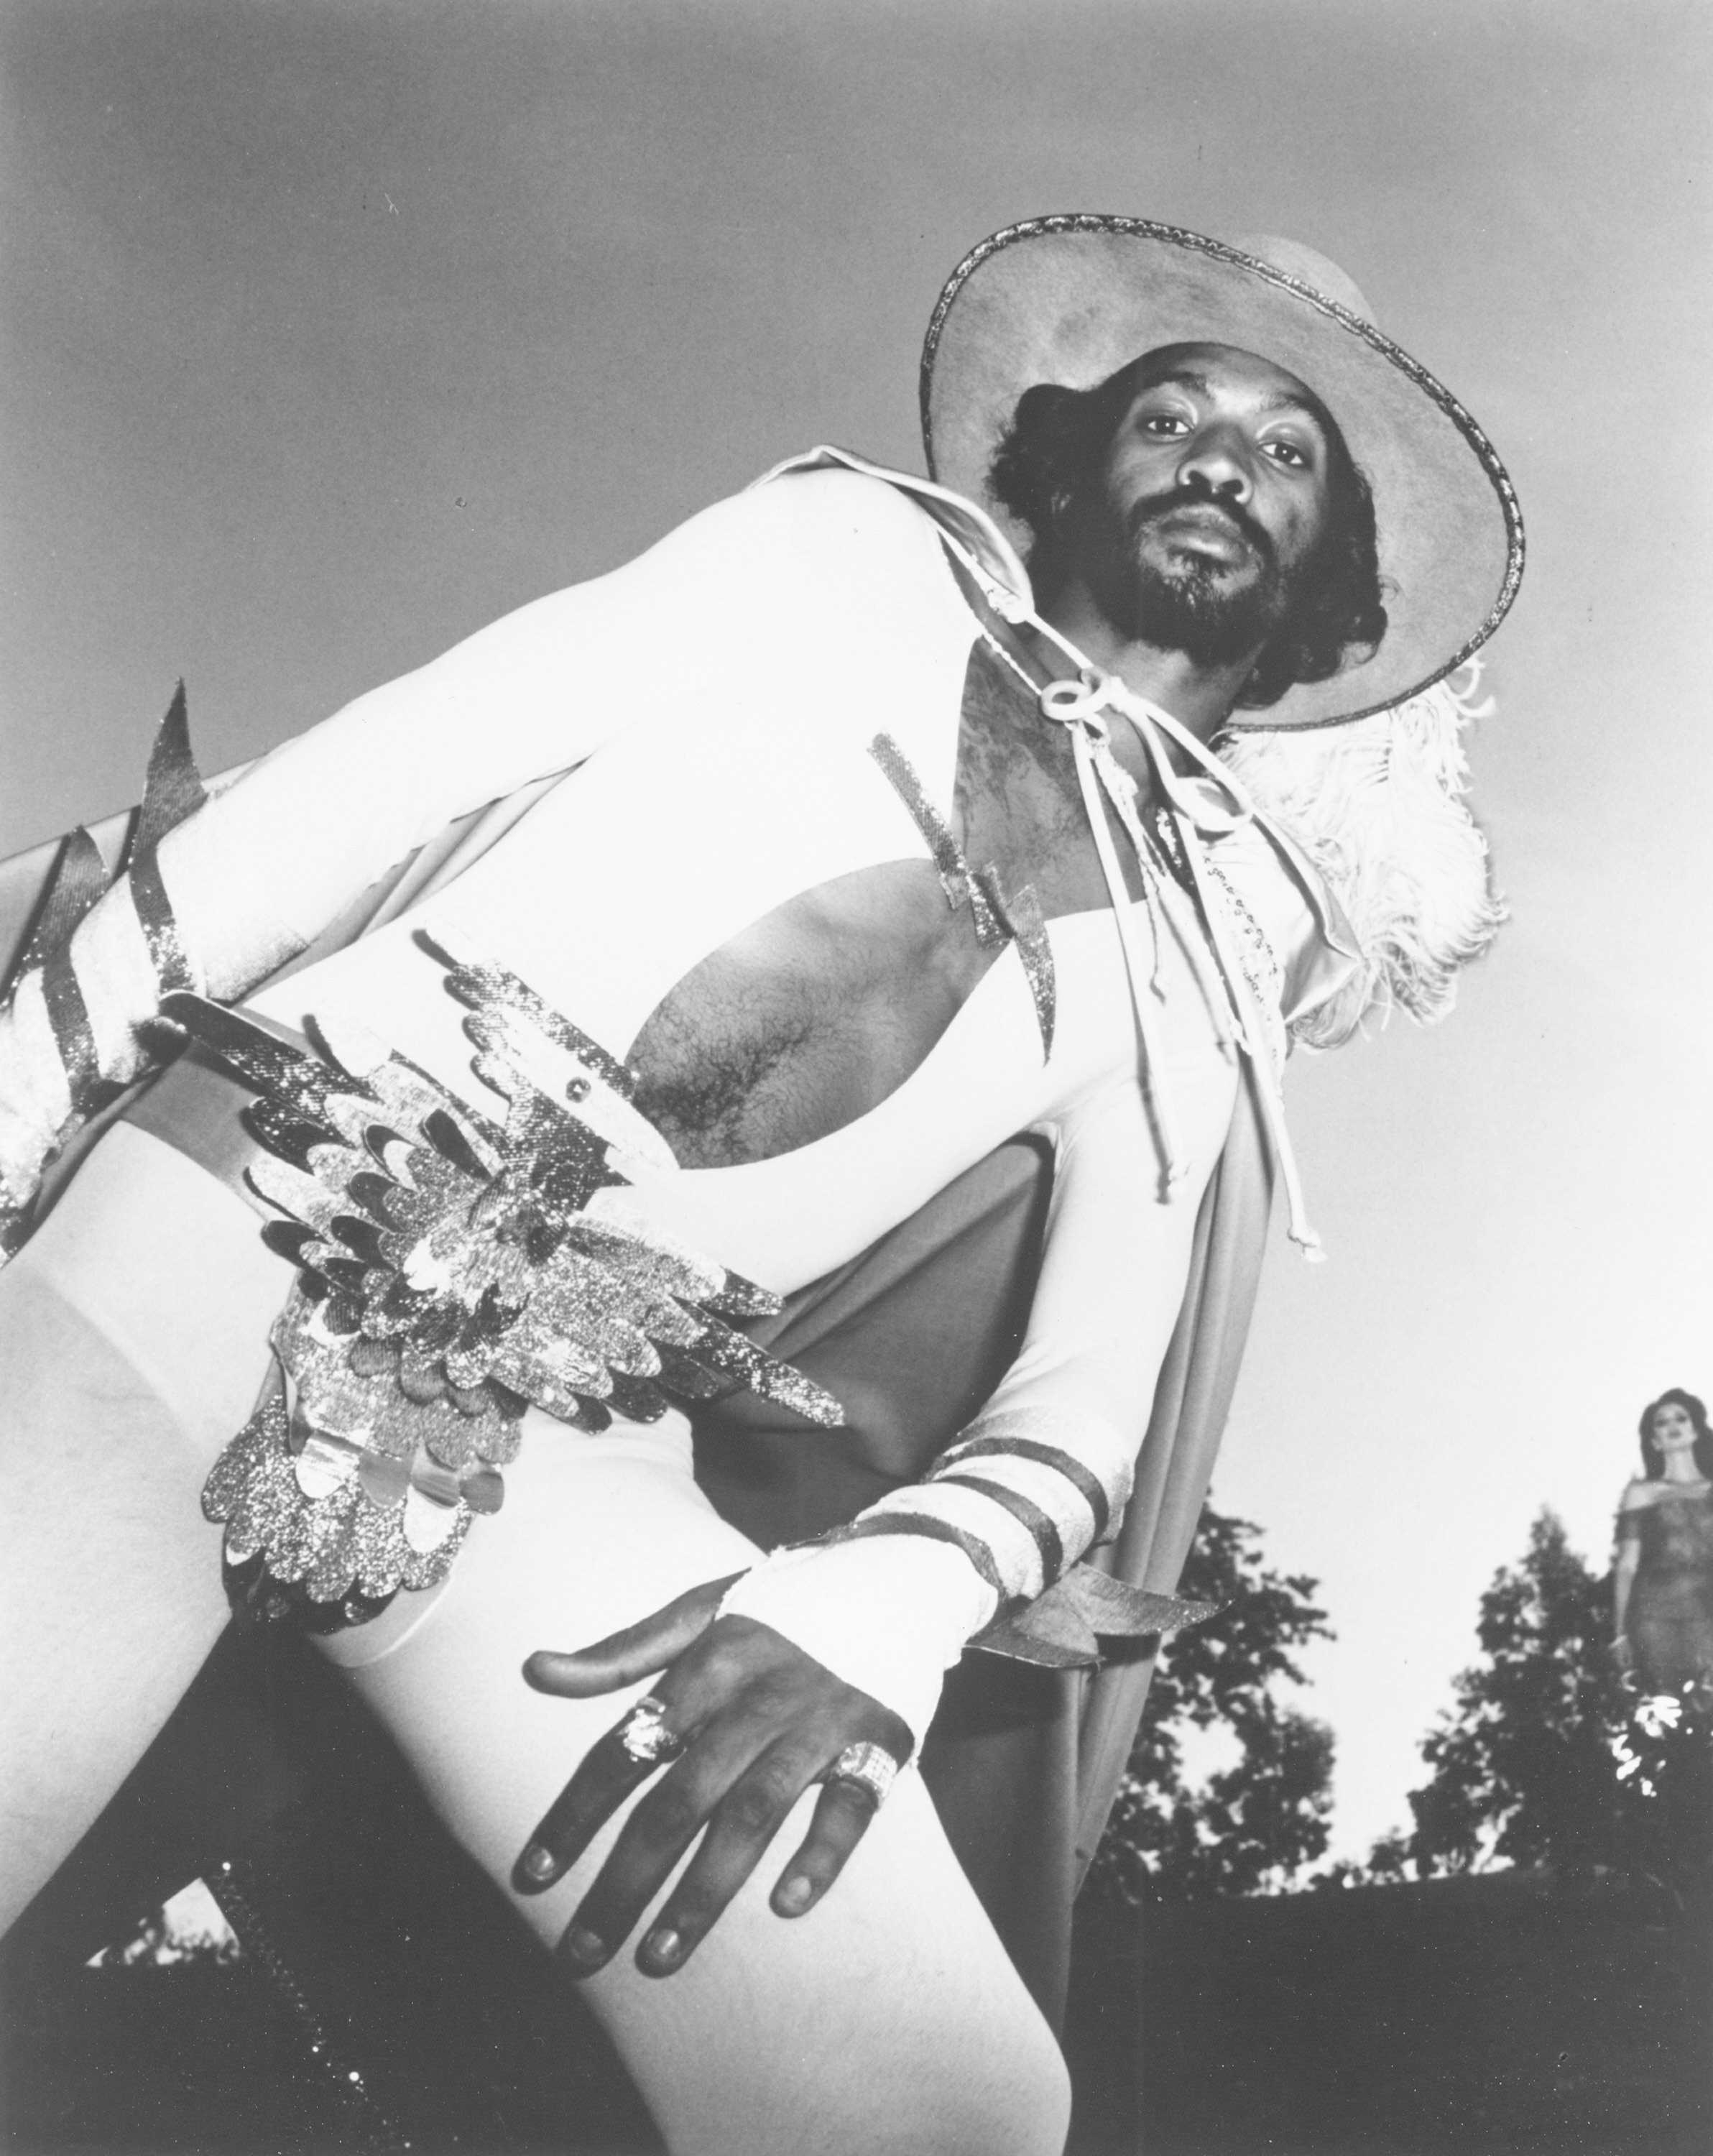 A black and white portrait of Eddie Hazel in a white disco suit, wearing a giant eagle belt.